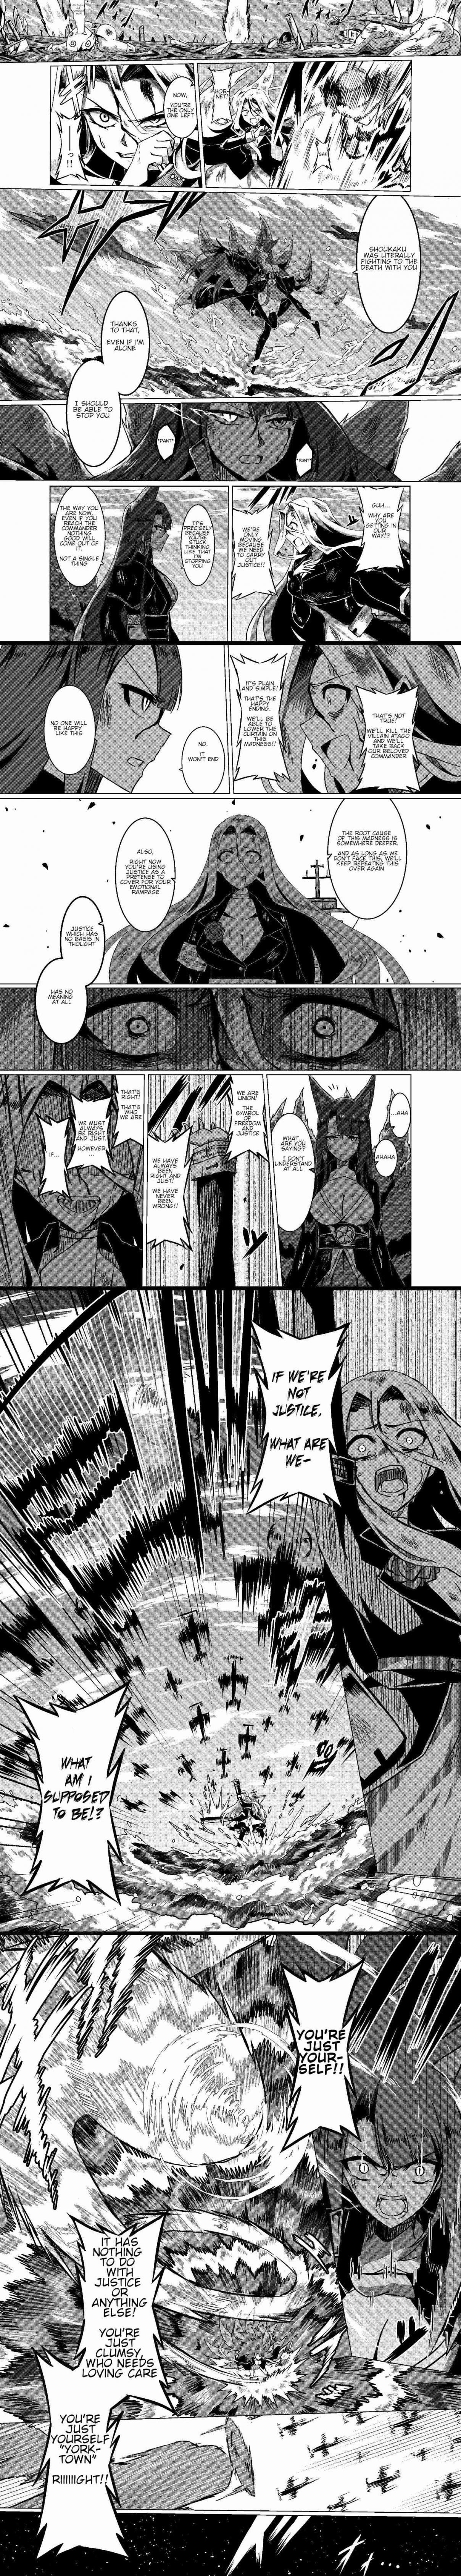 Azur Lane: A Journal (Doujinshi) Ch. 22 The Need For Justice